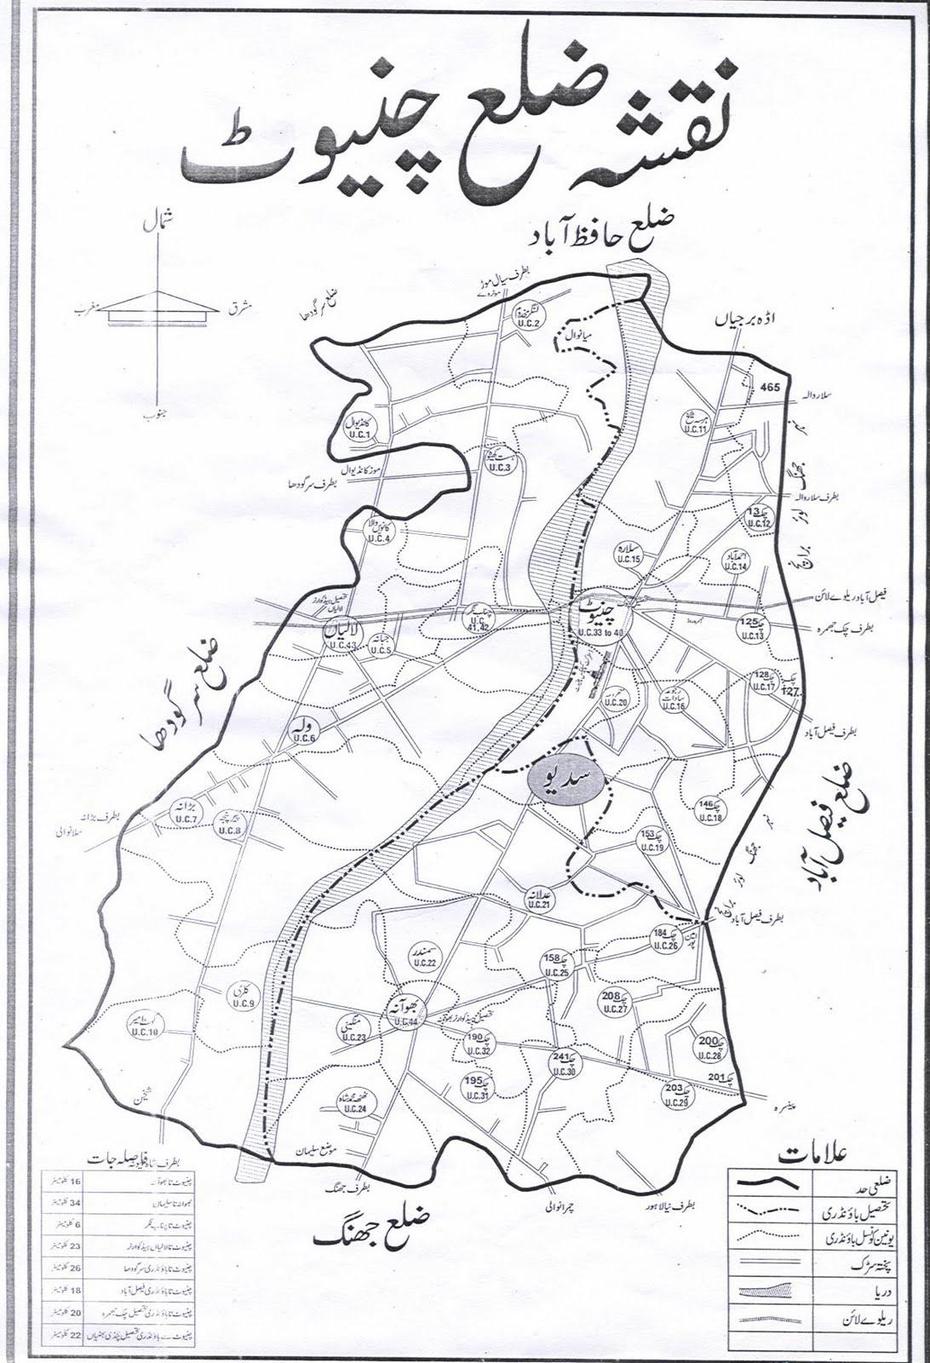 Sociology: My Paradigm: Detailed Map Of District The Chiniot, Chiniot, Pakistan, Swat Valley, Mingora  City